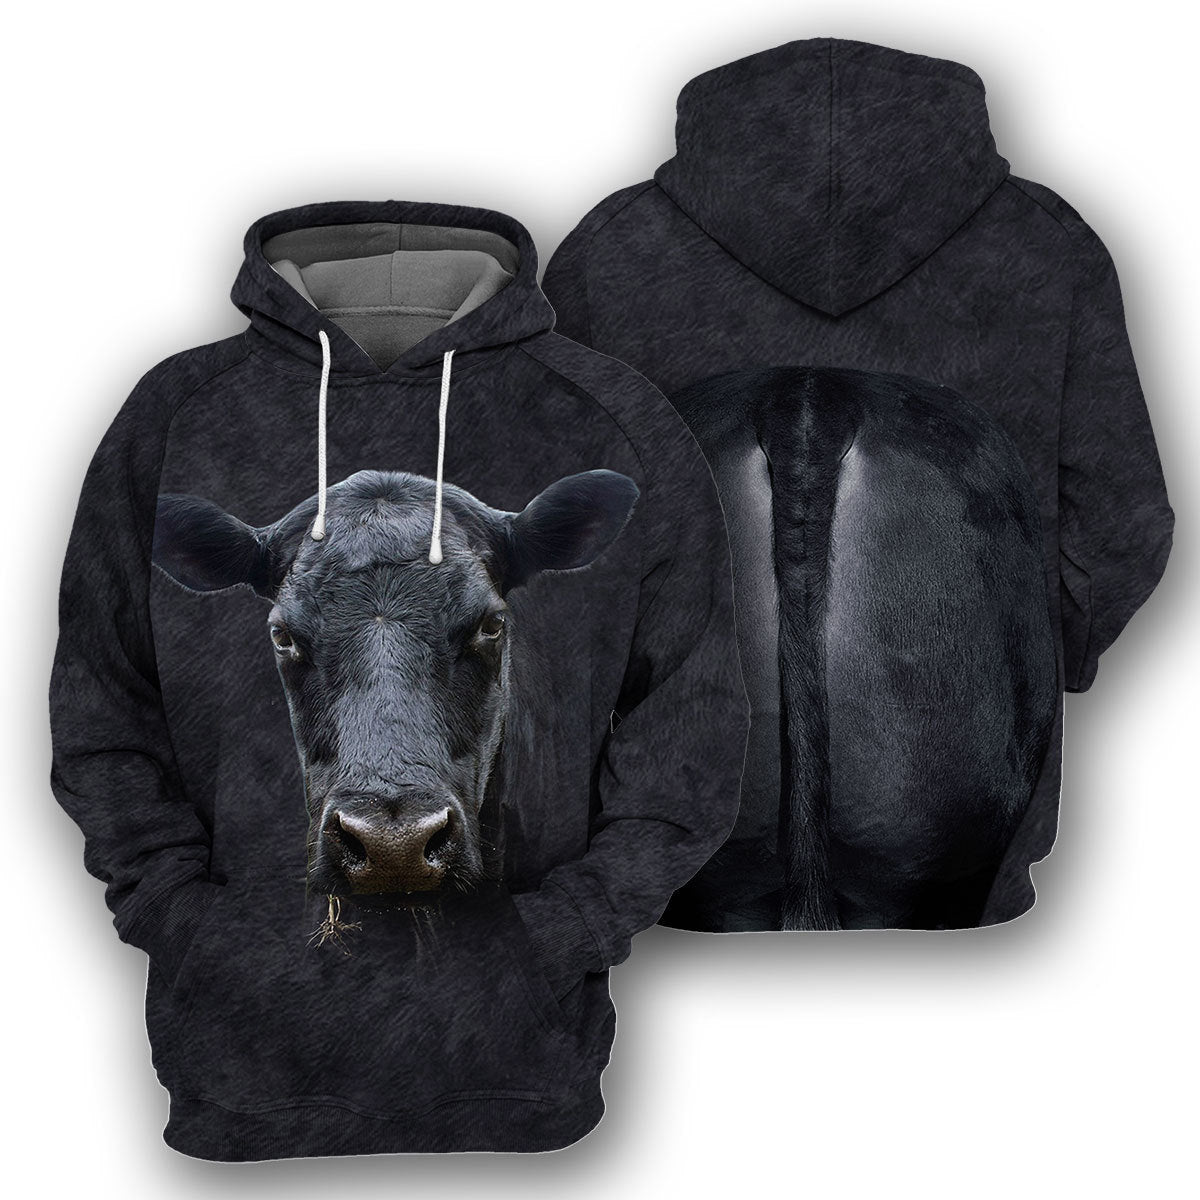 Angus Cattle Unique All Over Print T-Shirt Hoodie Gift Ideas